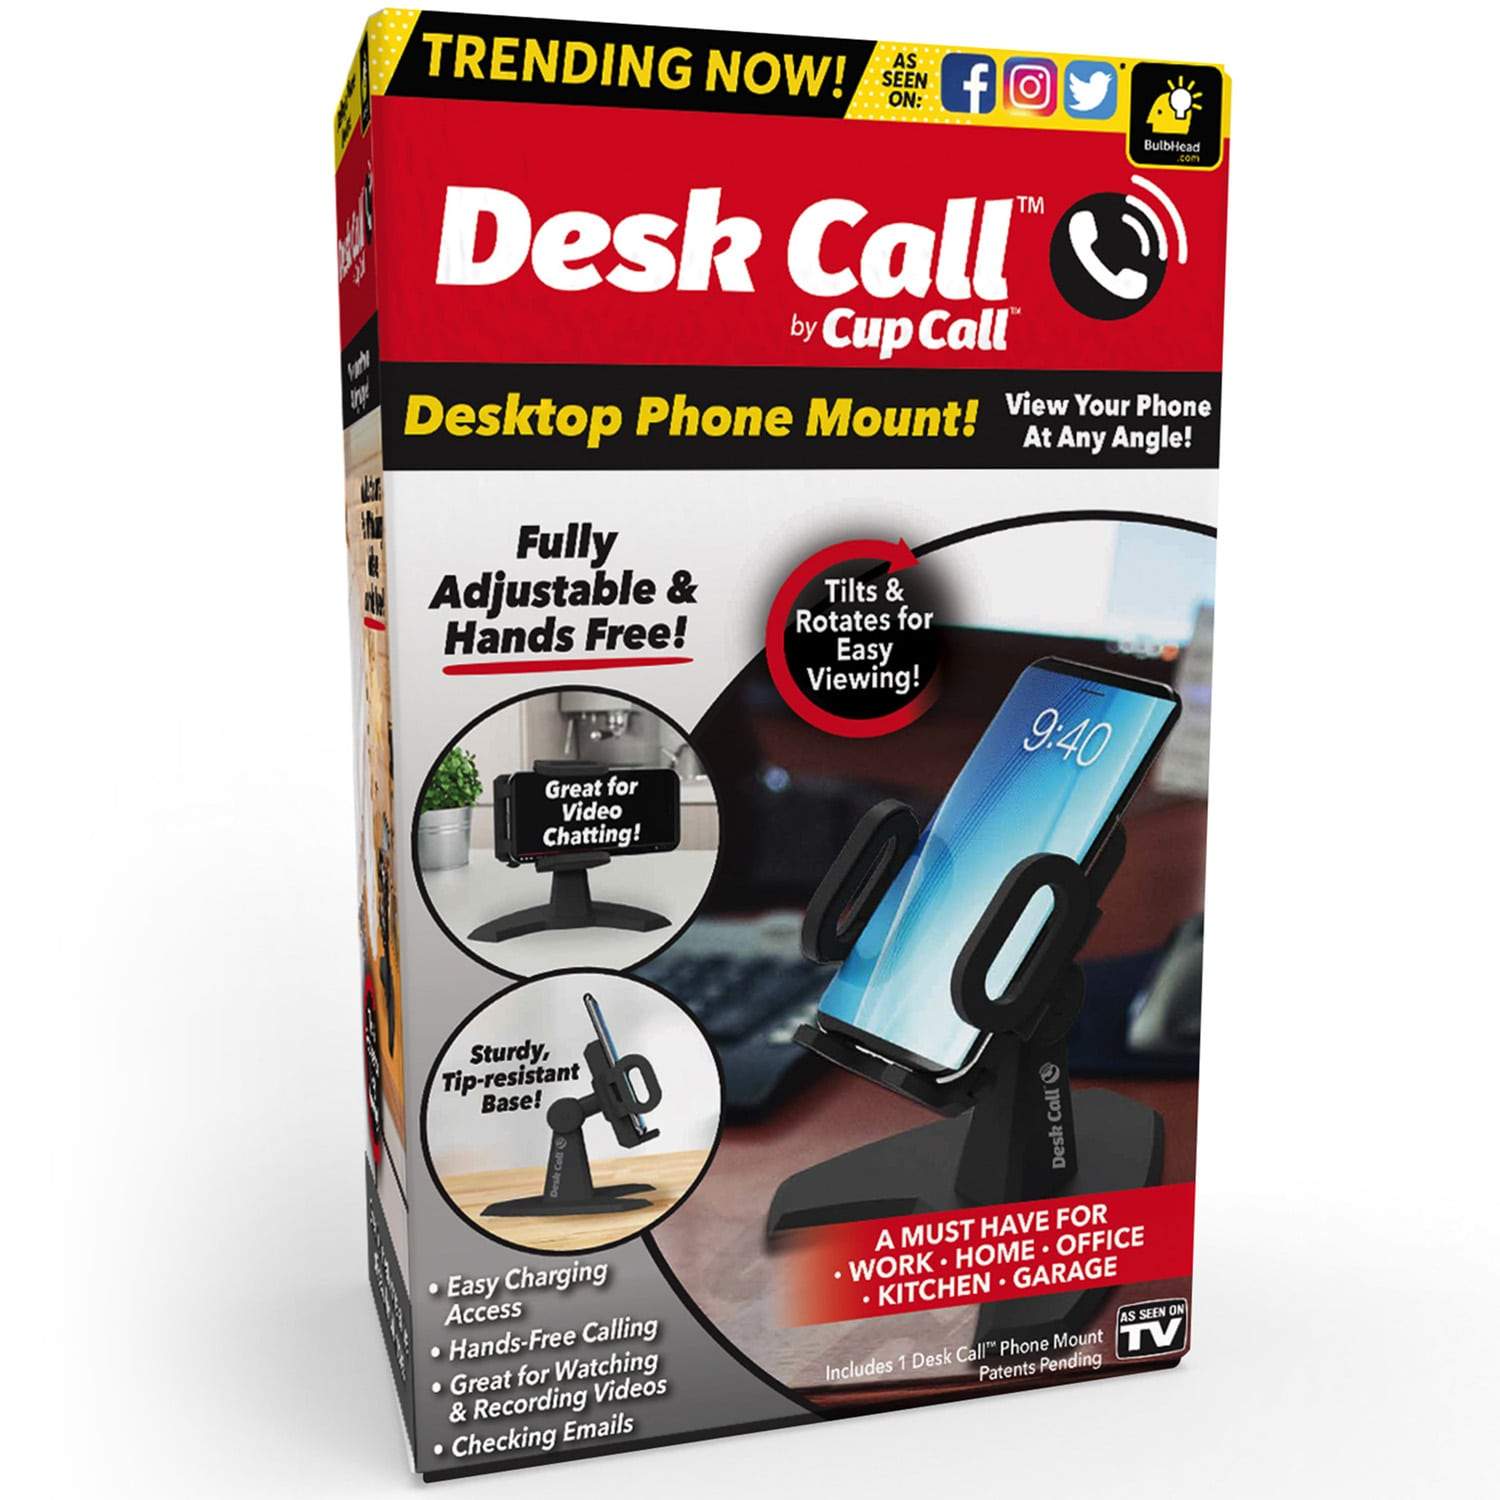 Cup Call + Desk Call